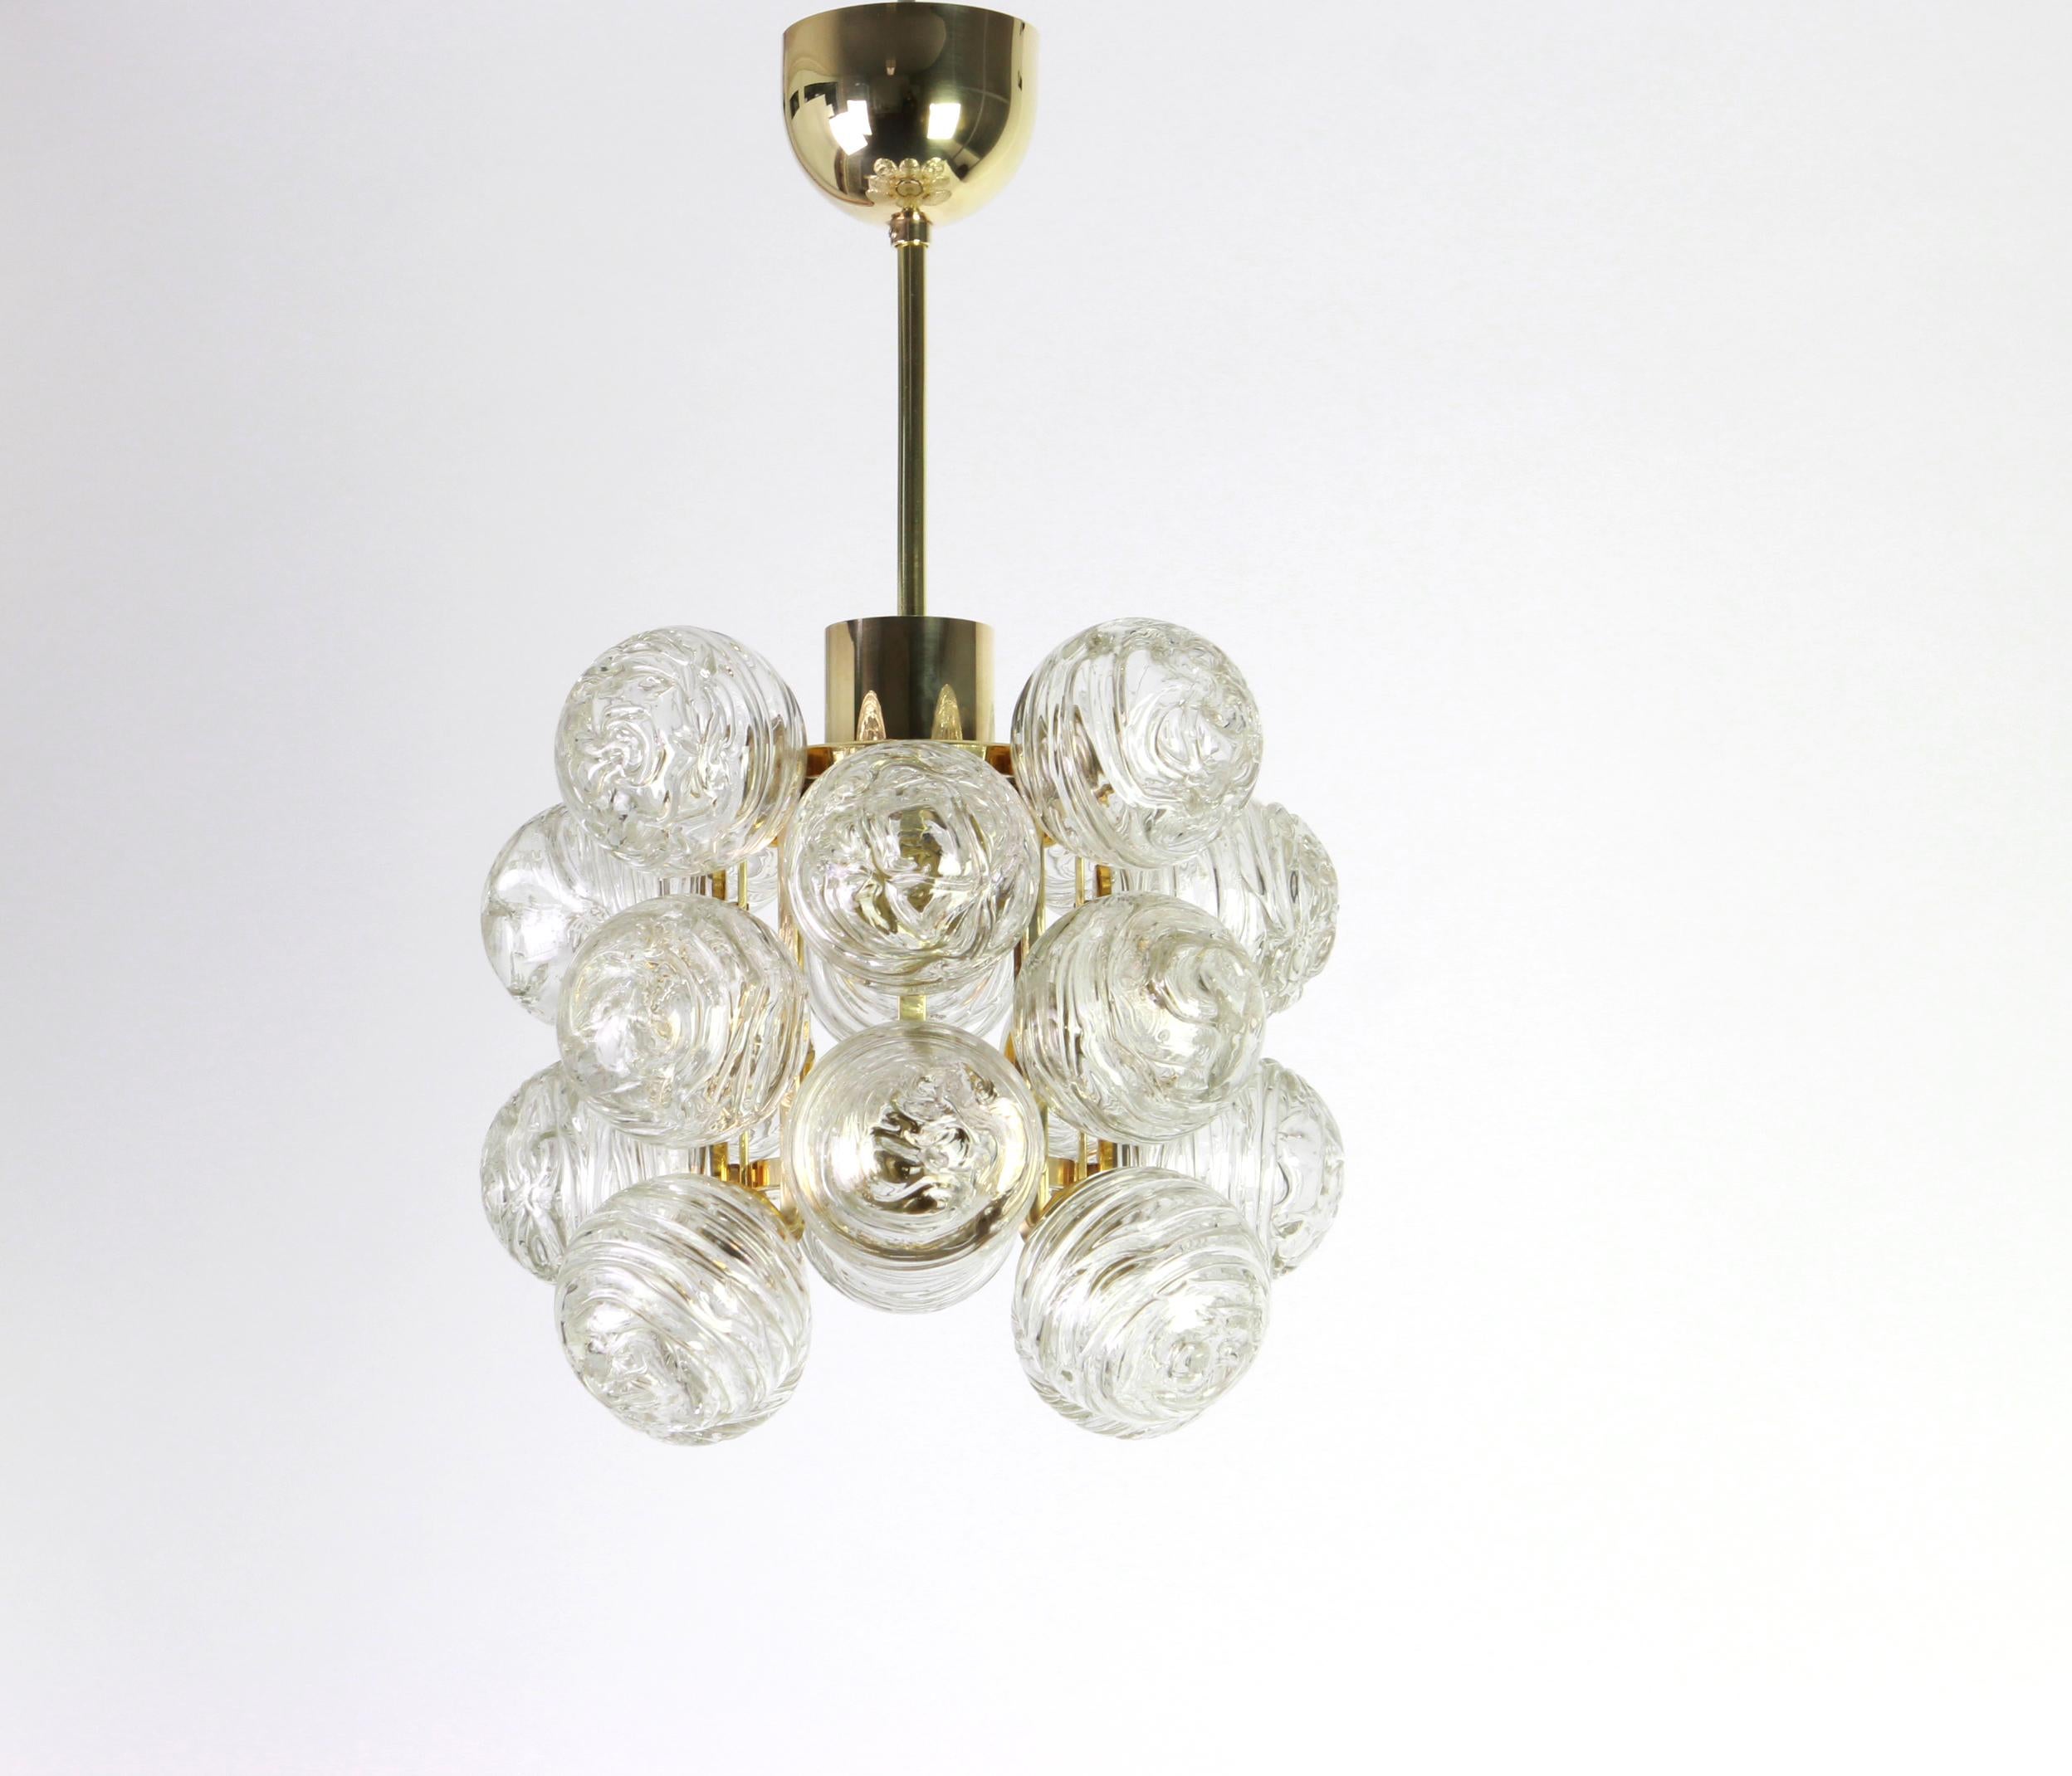 A petite midcentury pendant made by Doria Leuchtern, manufactured in Germany, circa 1970-1979.
The pendant is composed of many Murano glass swirl textured glass elements (snowballs) attached to a brass frame.

Sockets: 1 x E27 standard bulb. (Up to